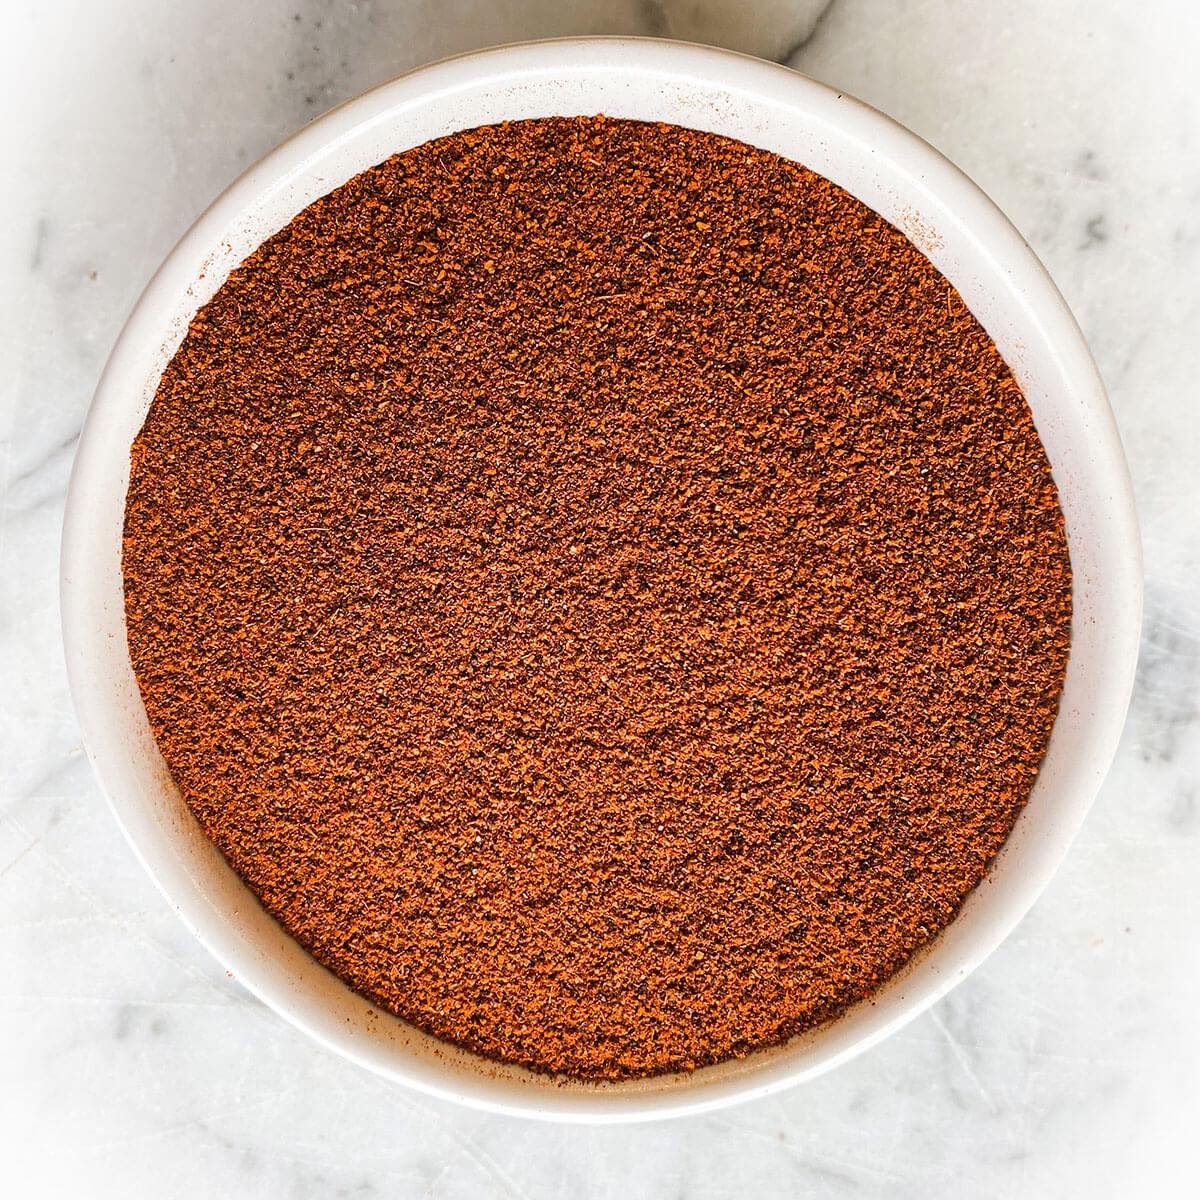 Chili powder blend in a white bowl with a white marble background